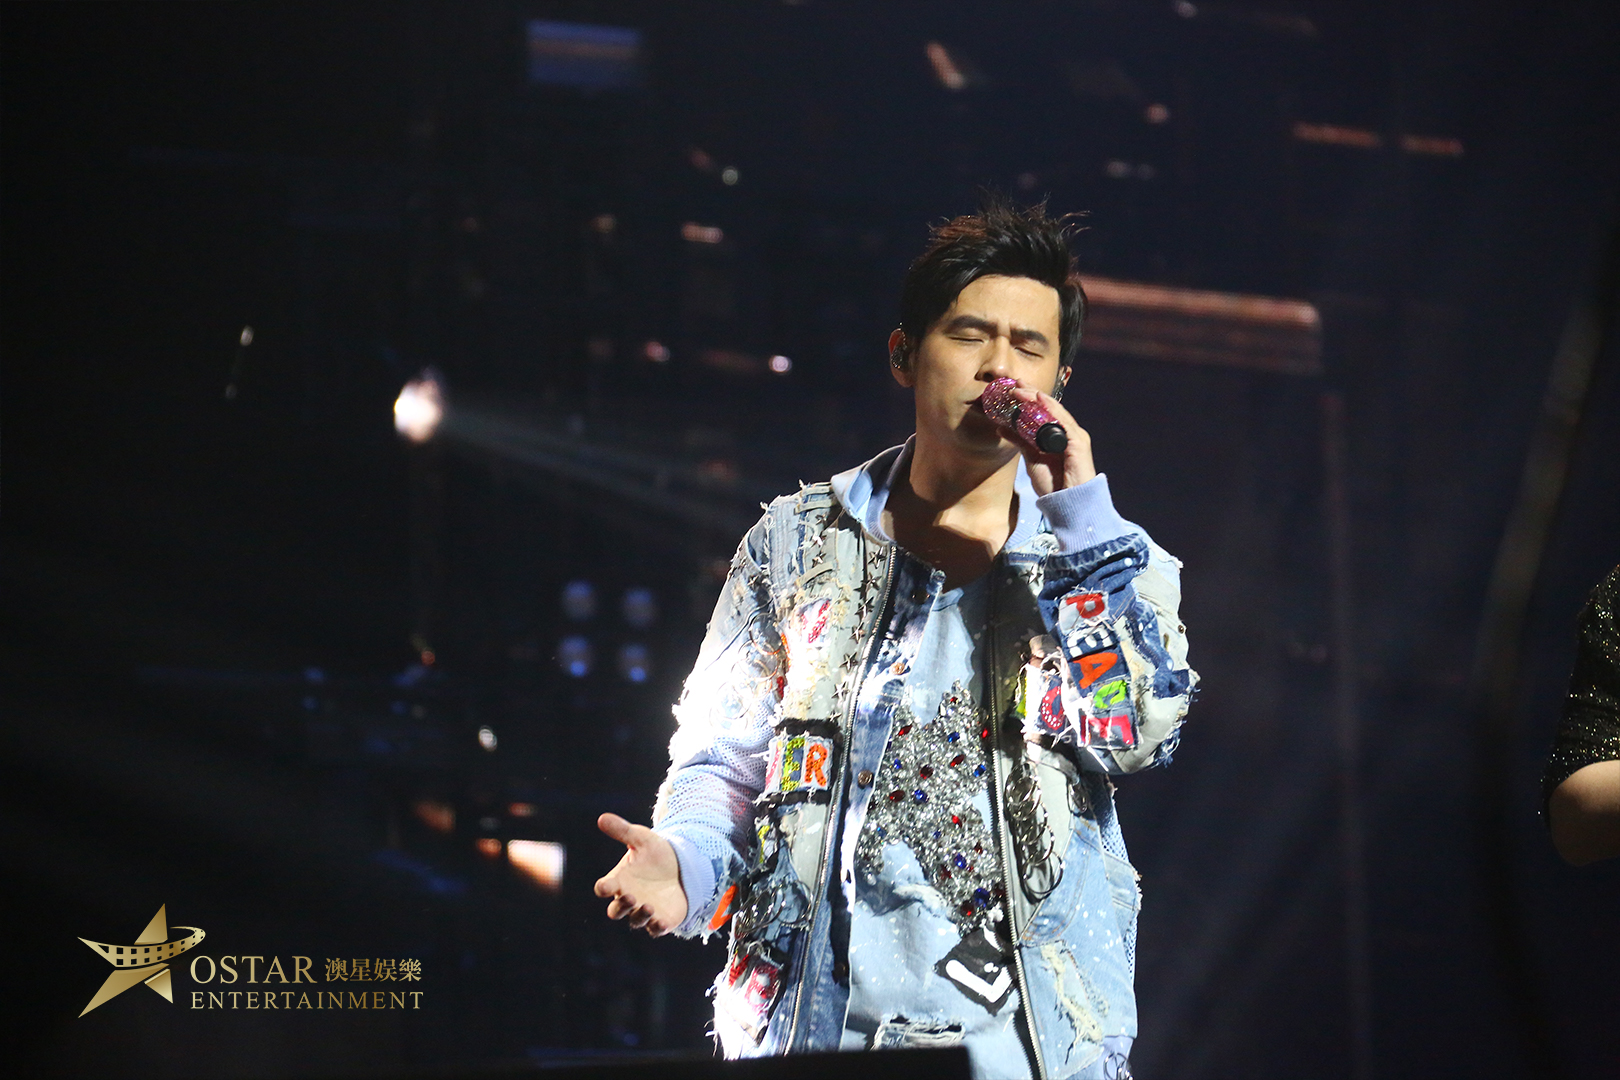 Produced by Ostar International Entertainment, Jay Chou “THE INVINCIBLE